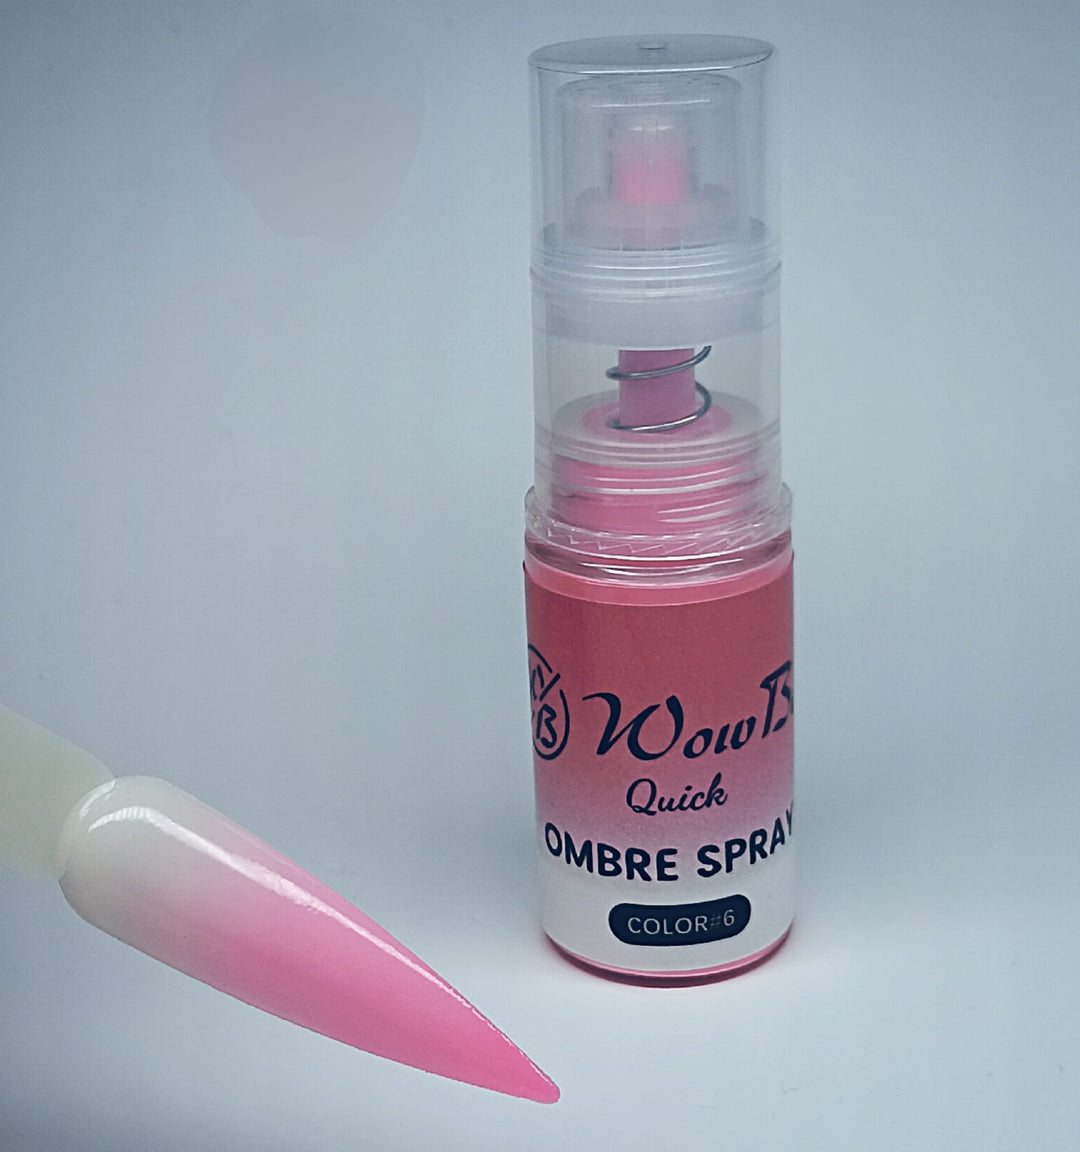 WowBao Nails Quick Ombre Spray - Brighter Pink 06